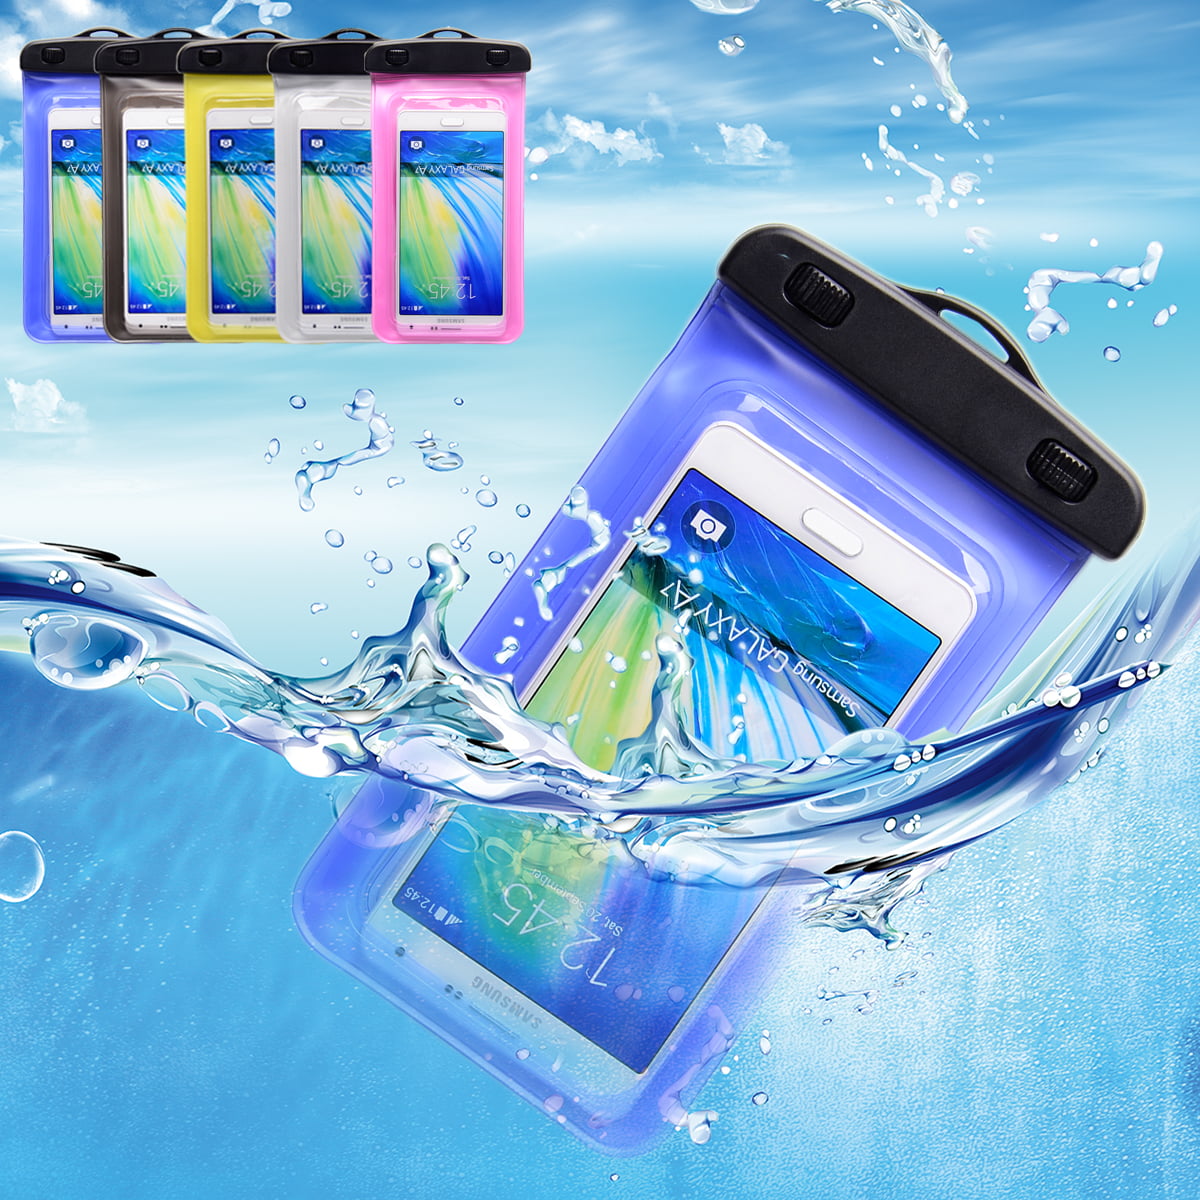 Waterproof Waist Dry Bag Underwater Pouch For Cellphone Samsung HTC Mobile Phone 